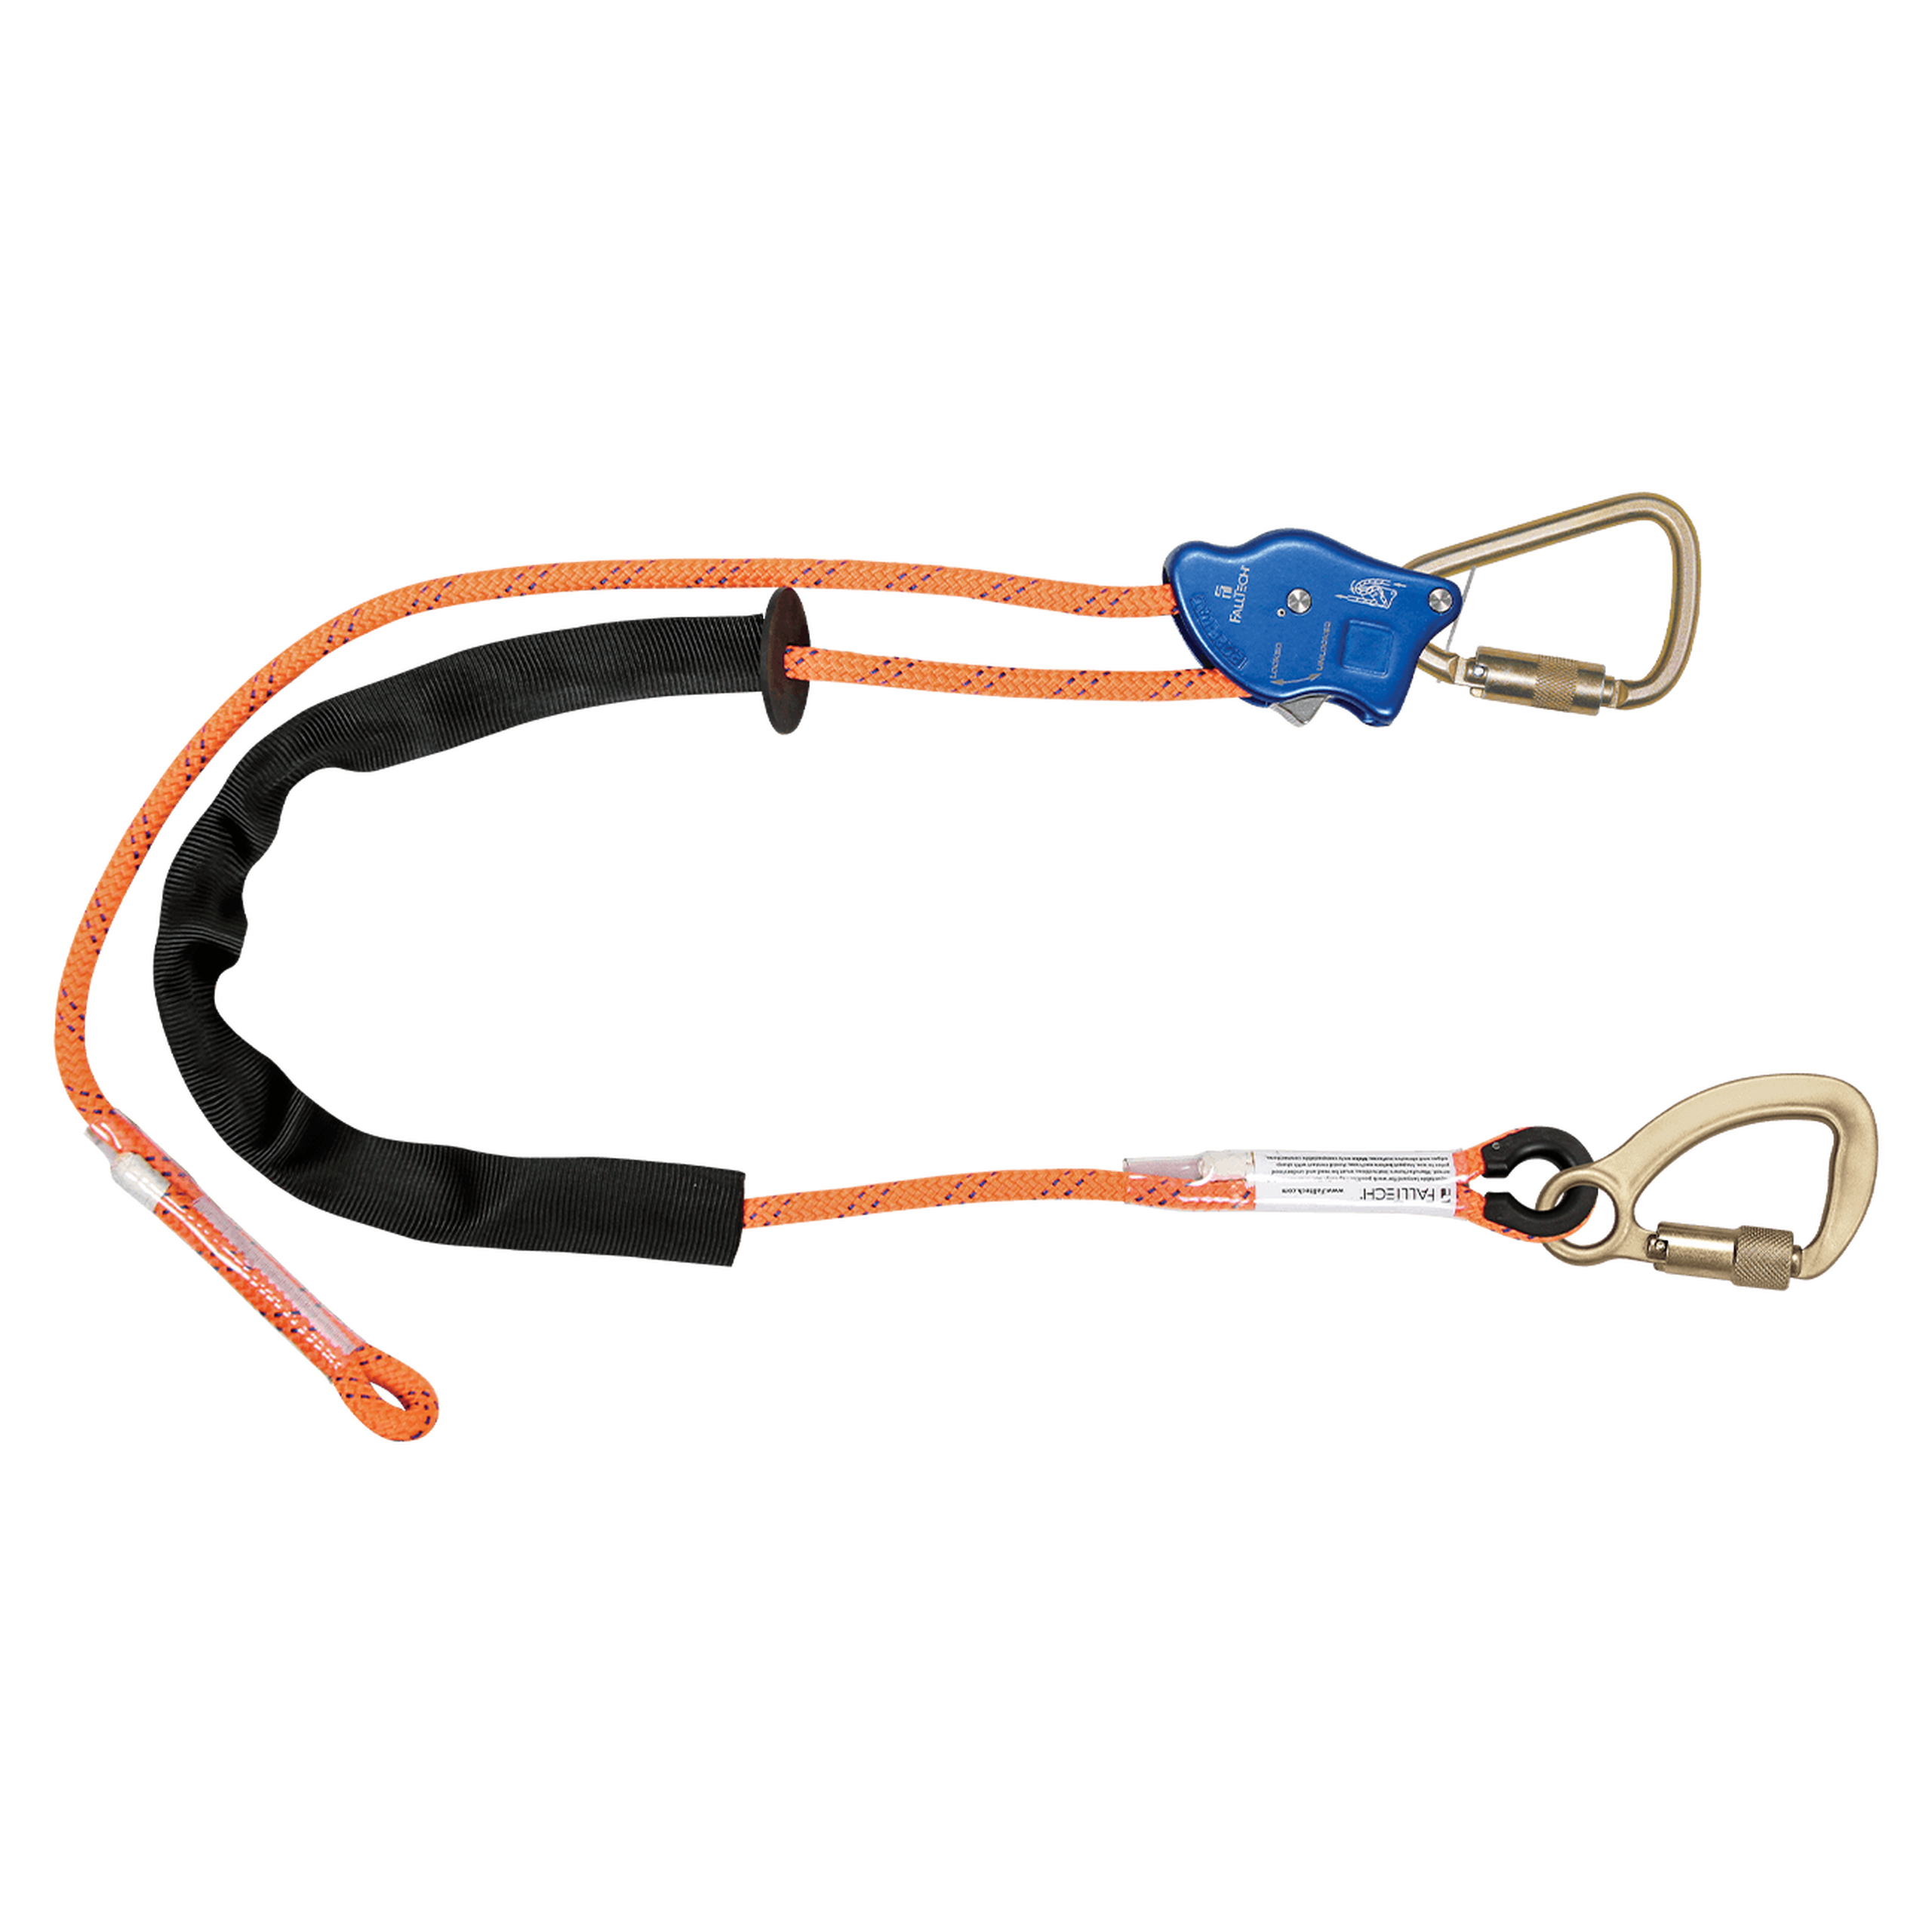 FallTech 8165C Tower Climber® Rope Positioning Lanyard with Aluminum Adjuster with Steel Carabiners (each)